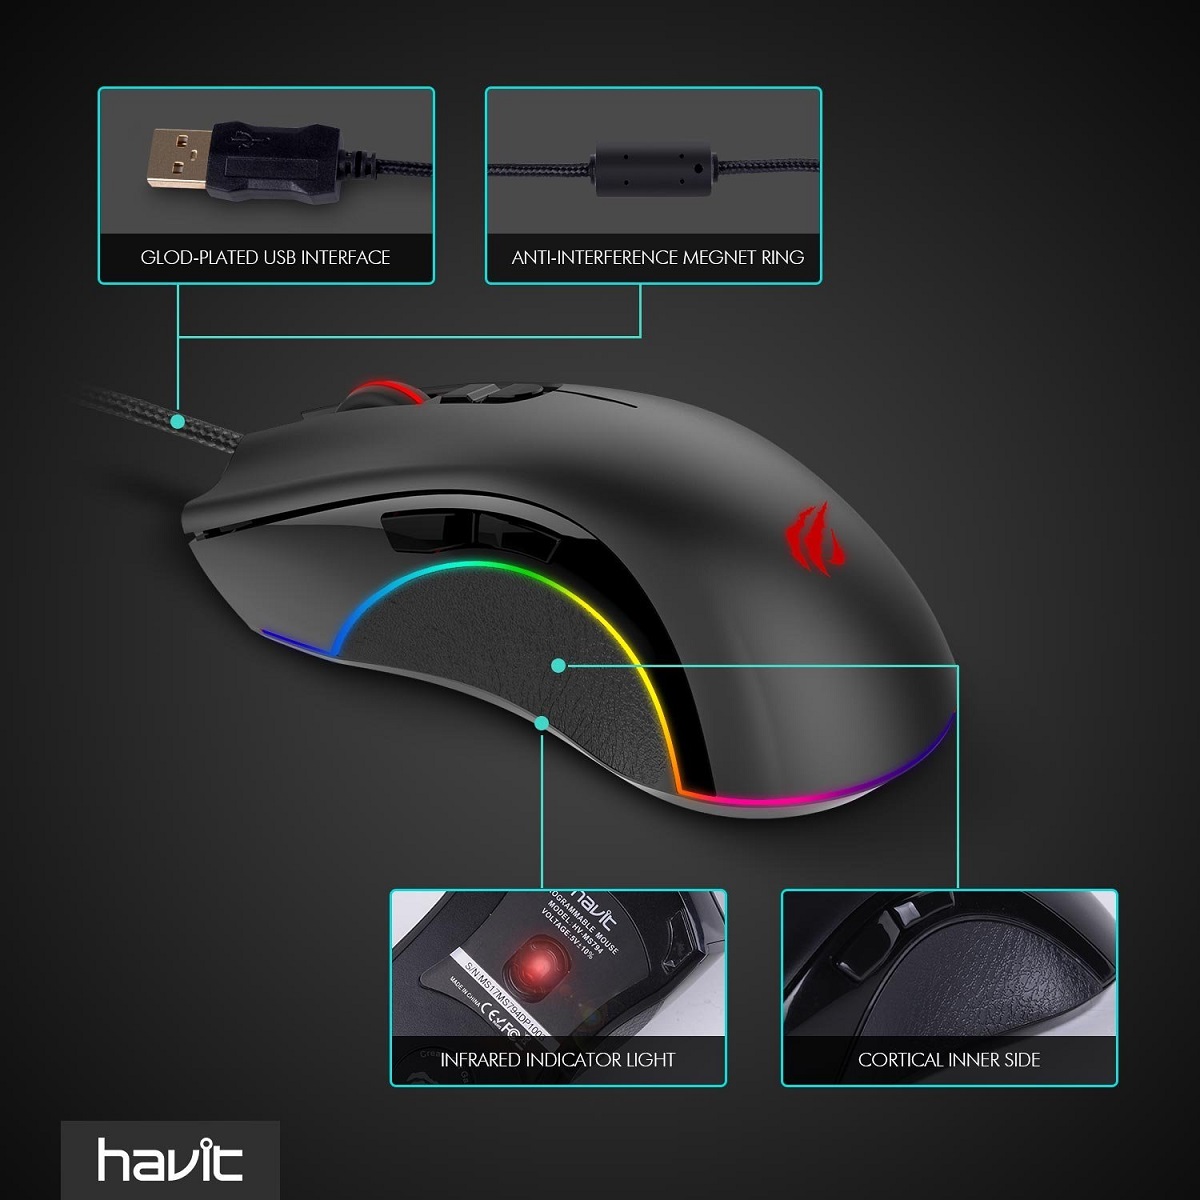 havit gaming mouse configuration software